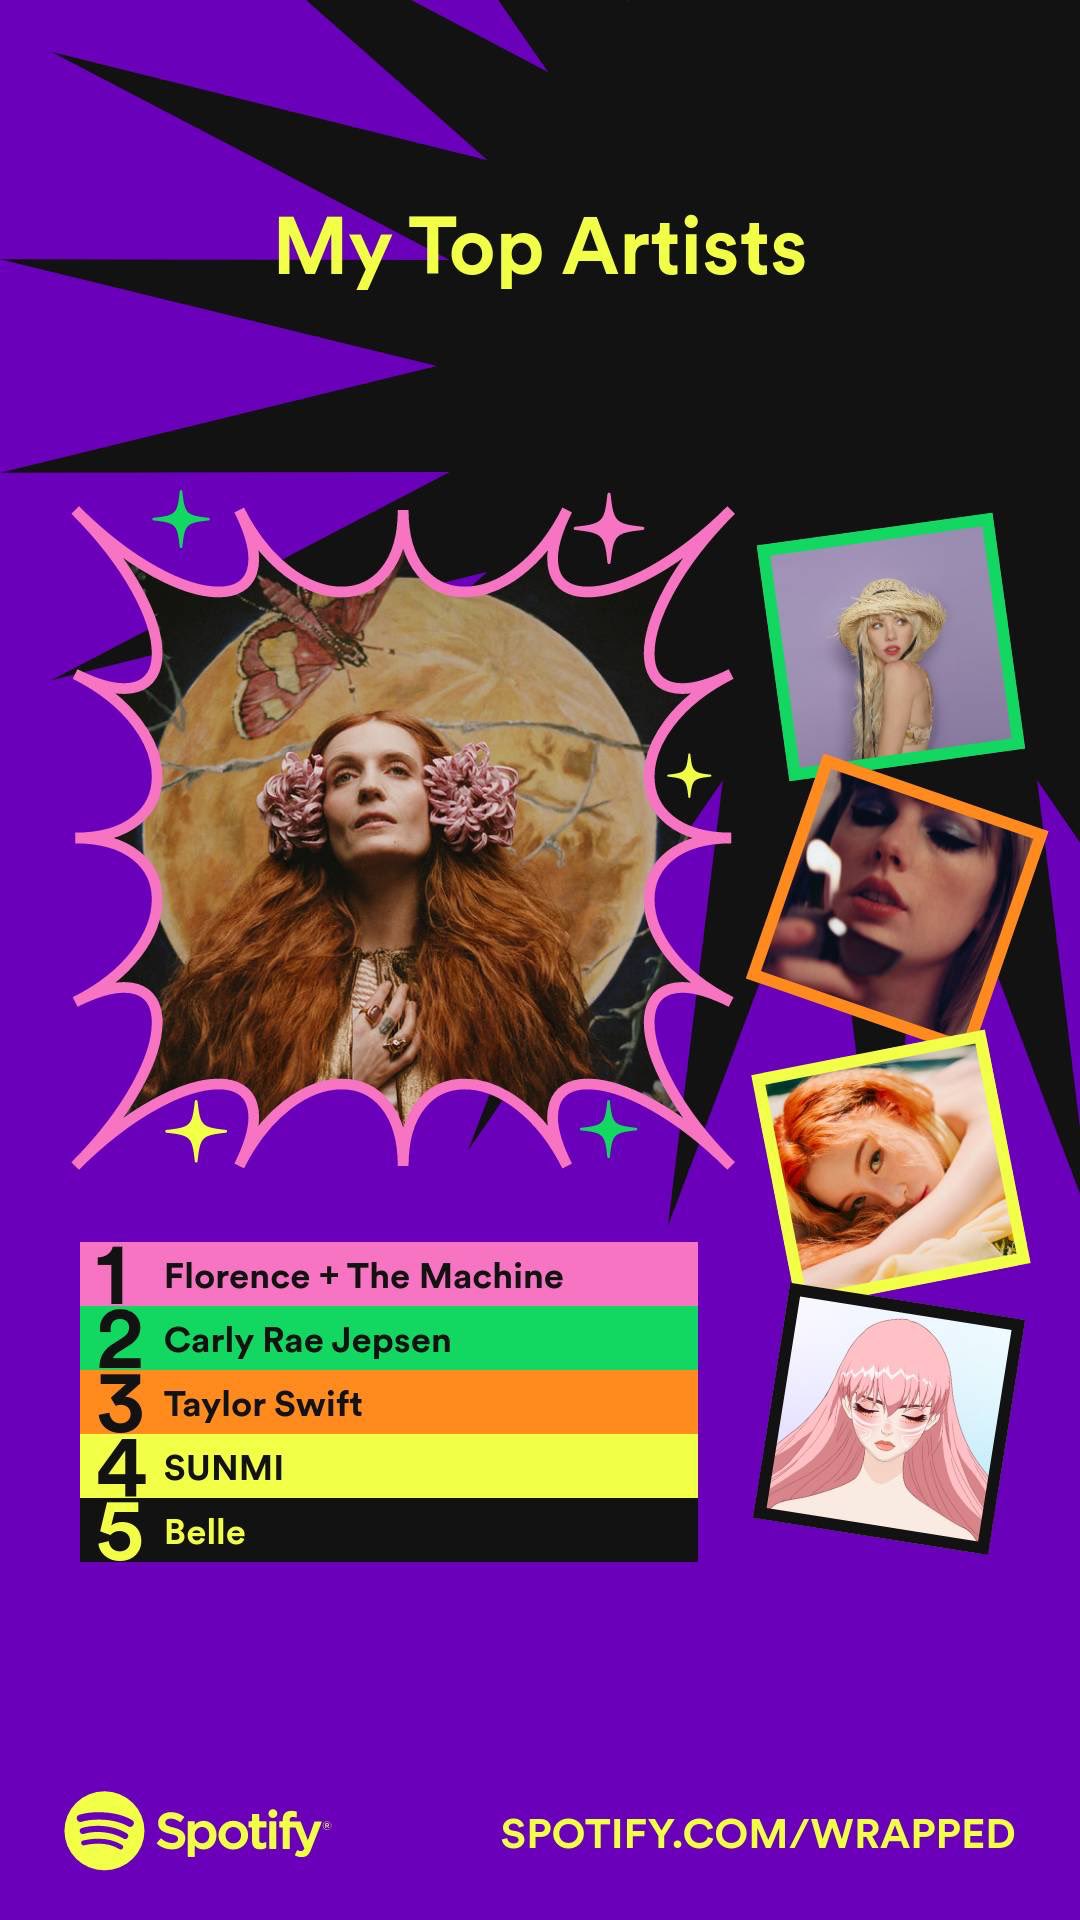 Top artists: Florence + The Machine, Carly Rae Jepsen, Taylor Swift, Sunmi, and Belle.